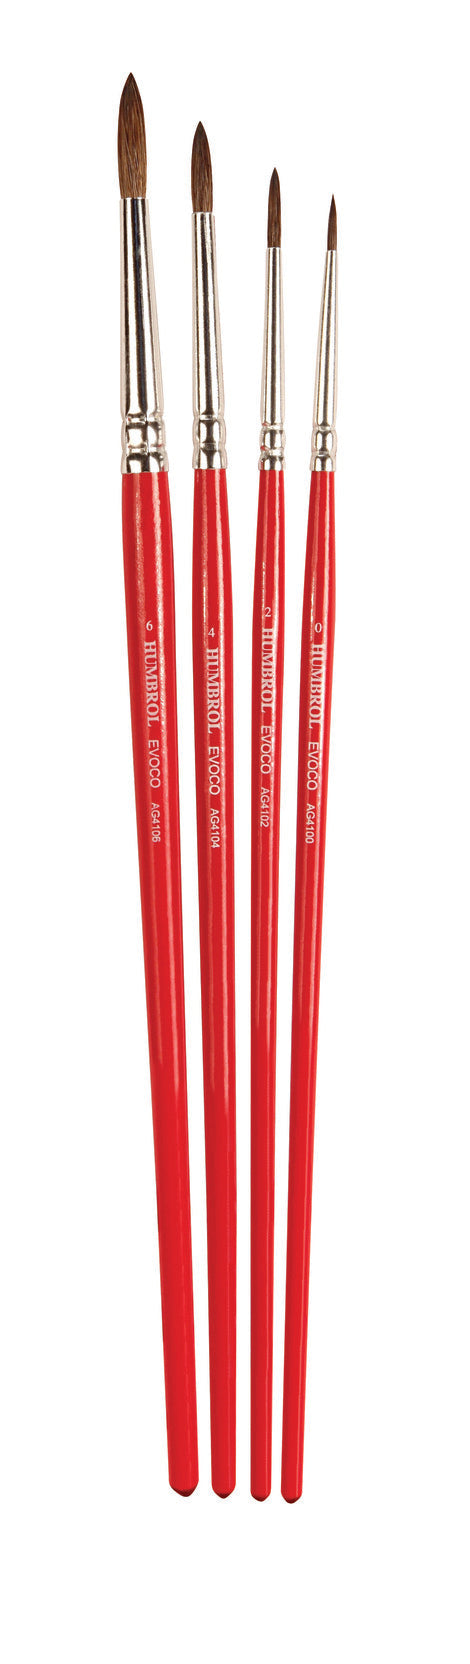 Humbrol AG4150 - Evoco Paint Brushes